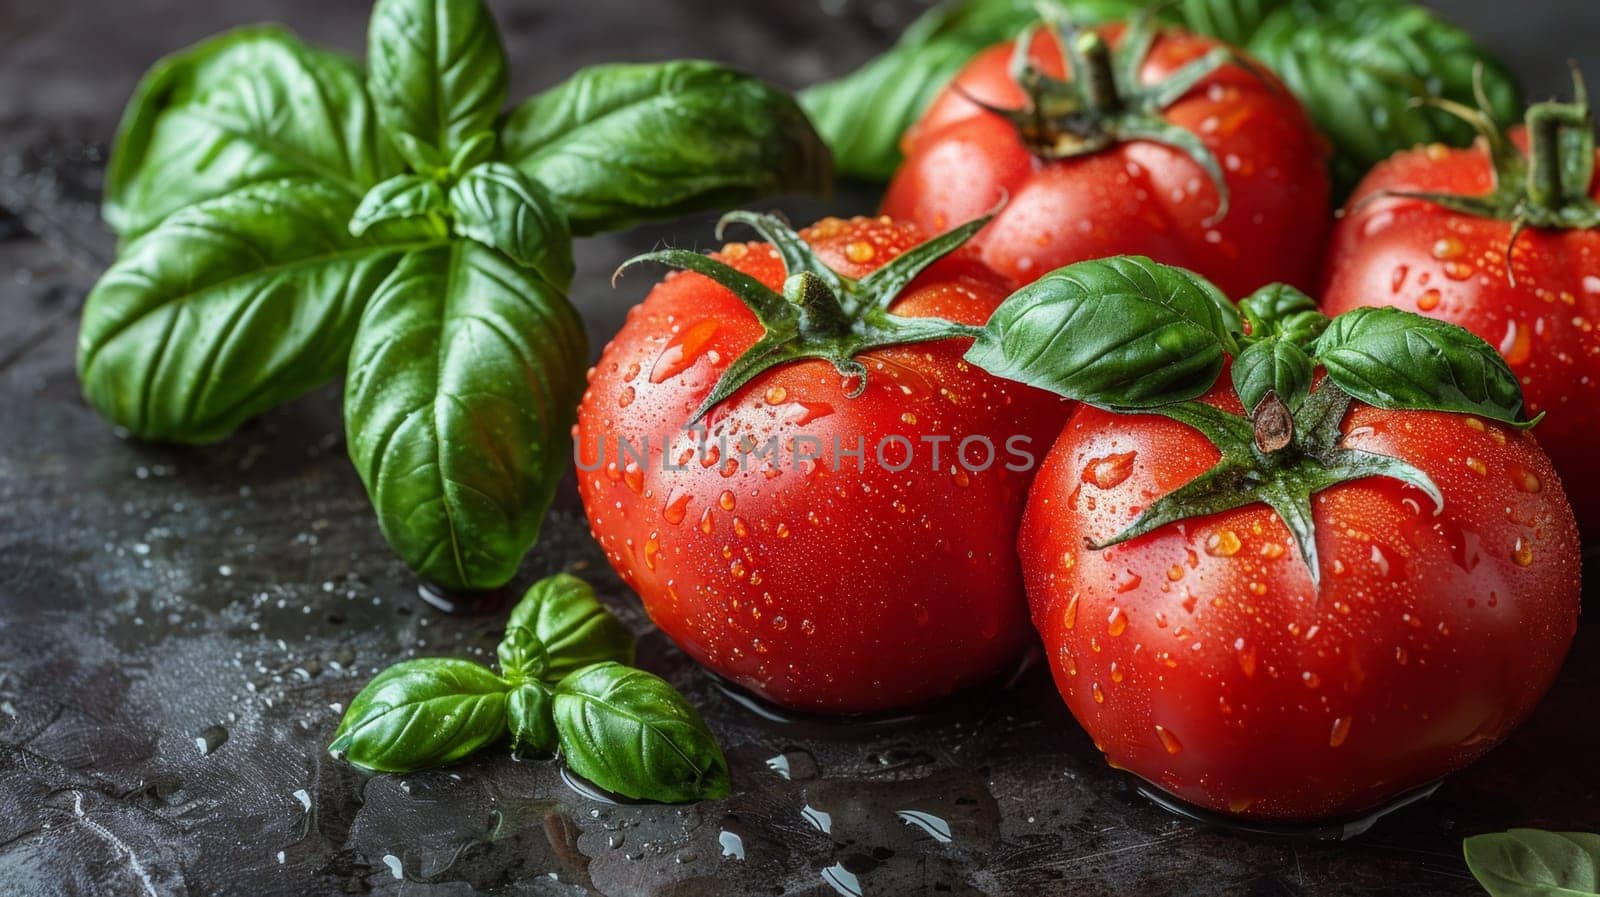 A group of tomatoes with water droplets on them and basil leaves, AI by starush